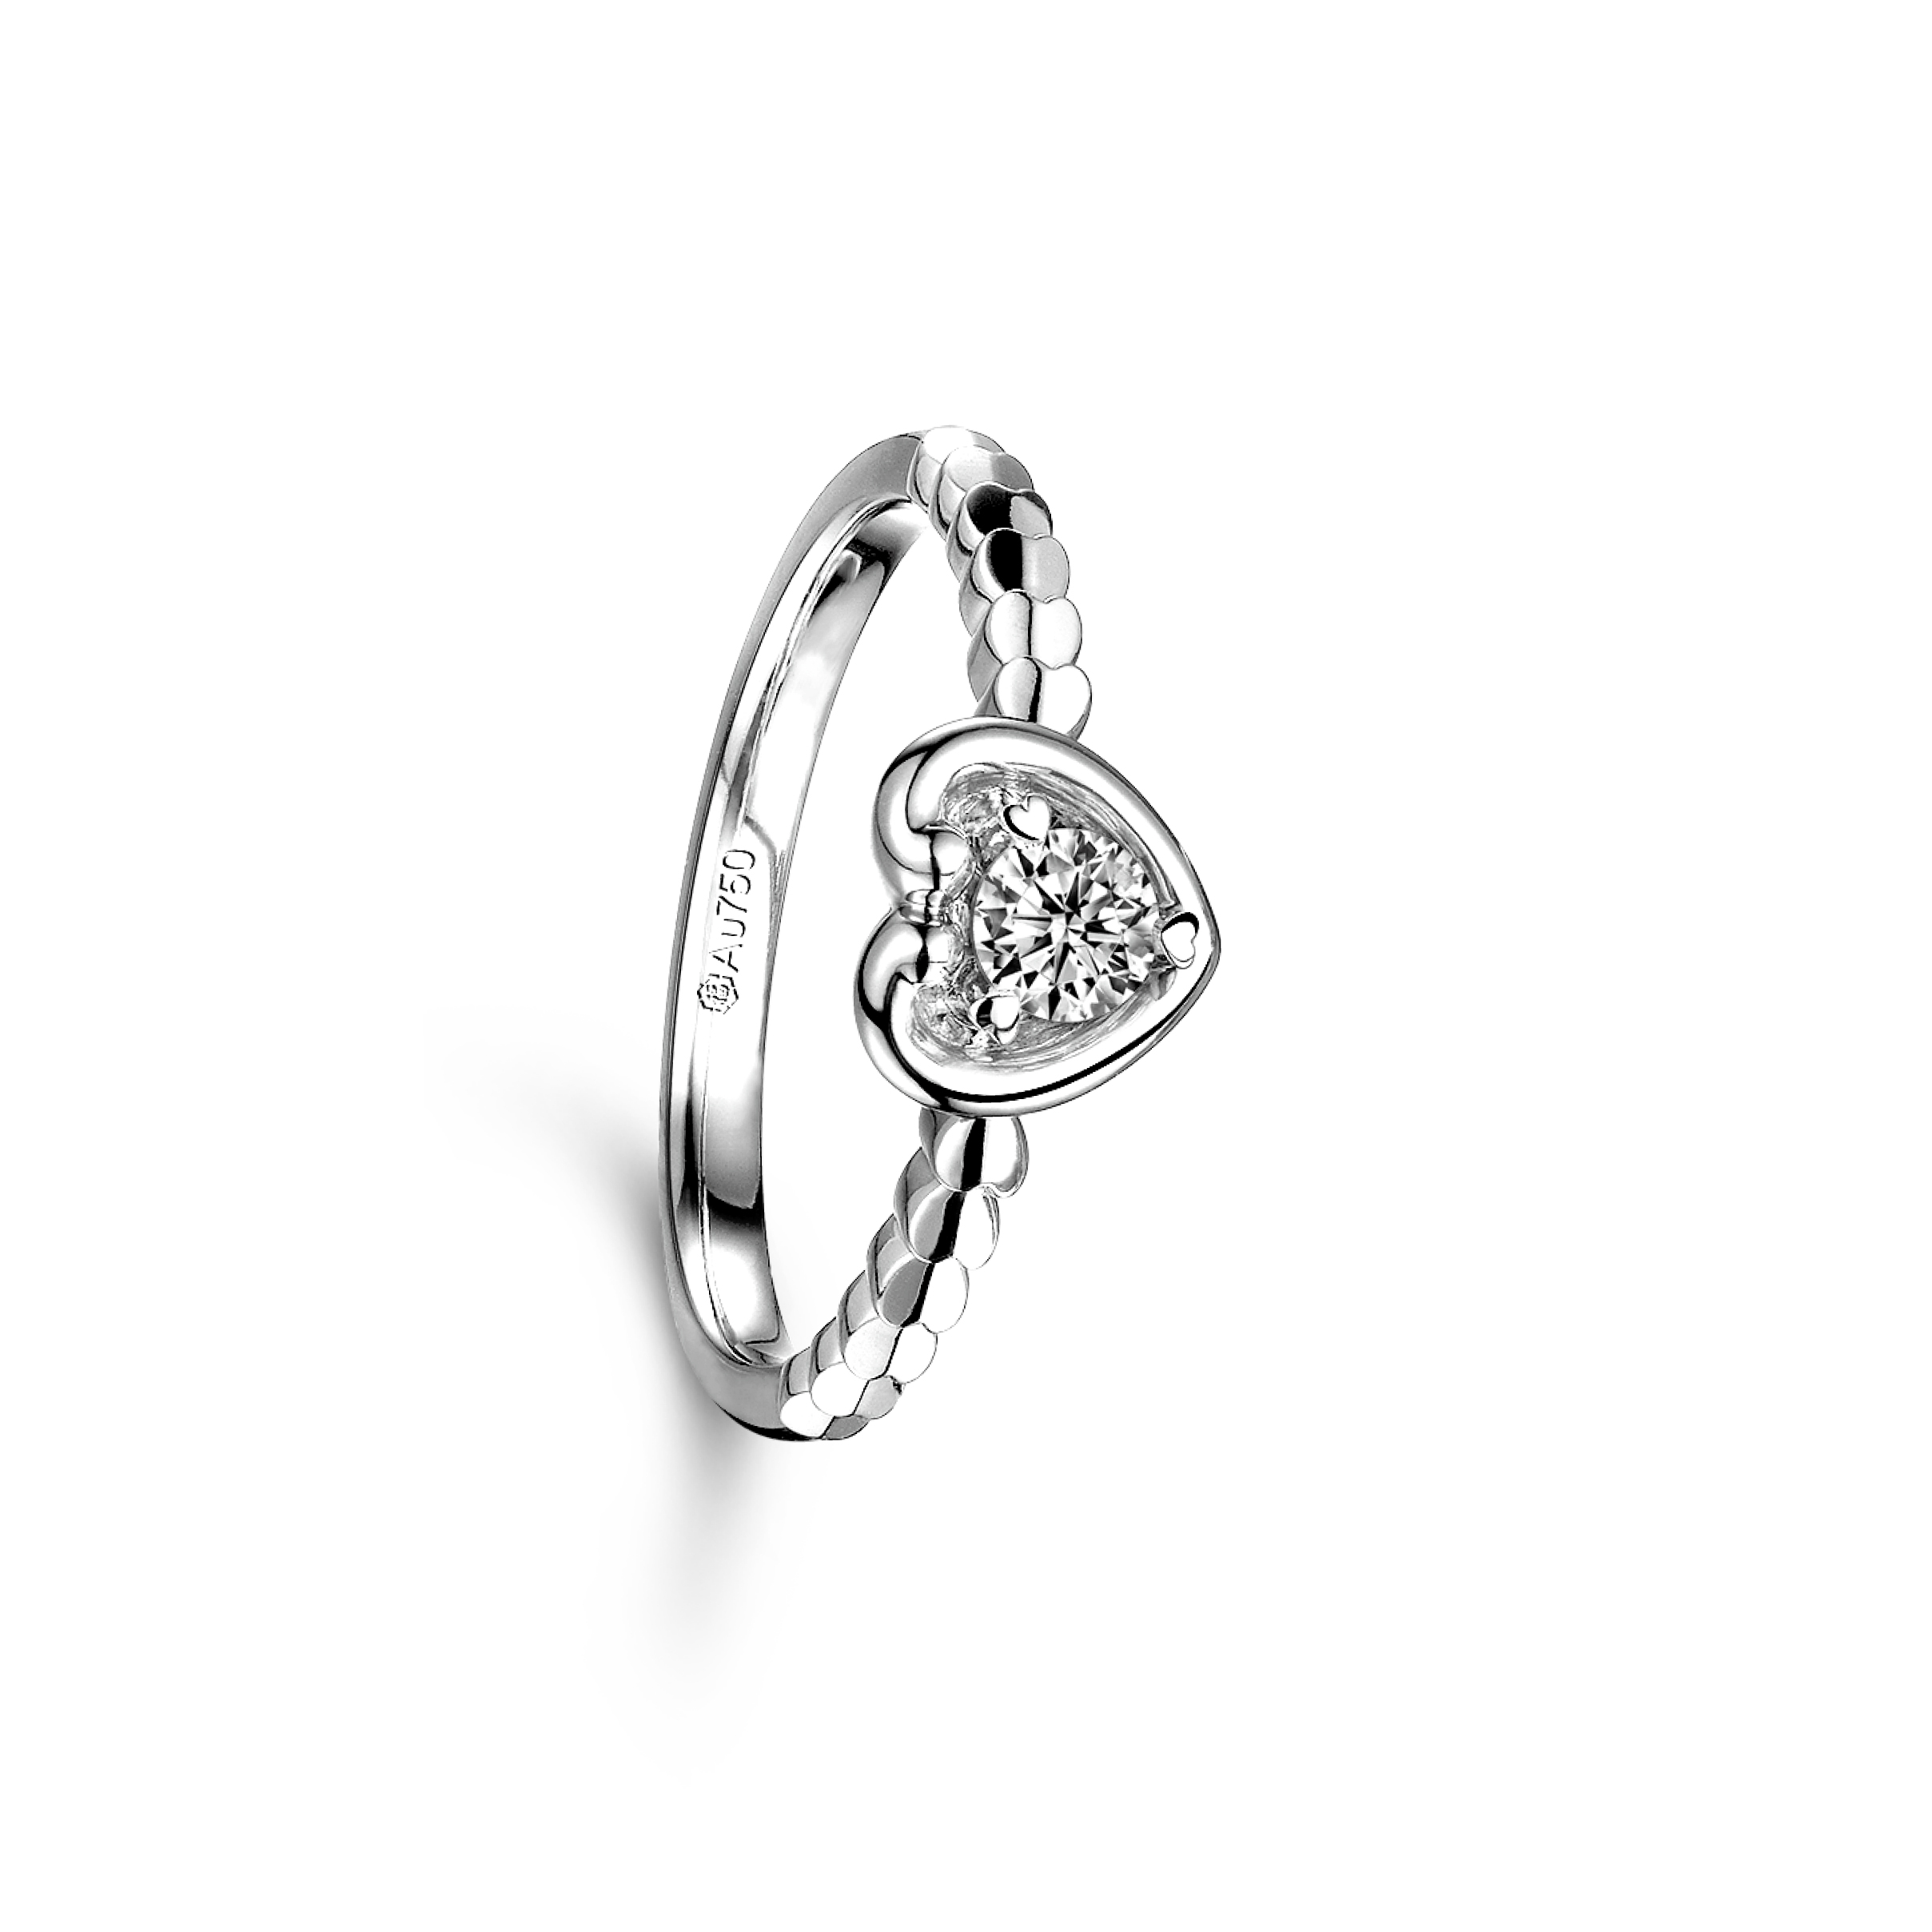 Love is Beauty Collection 18K White Gold Diamond Ring